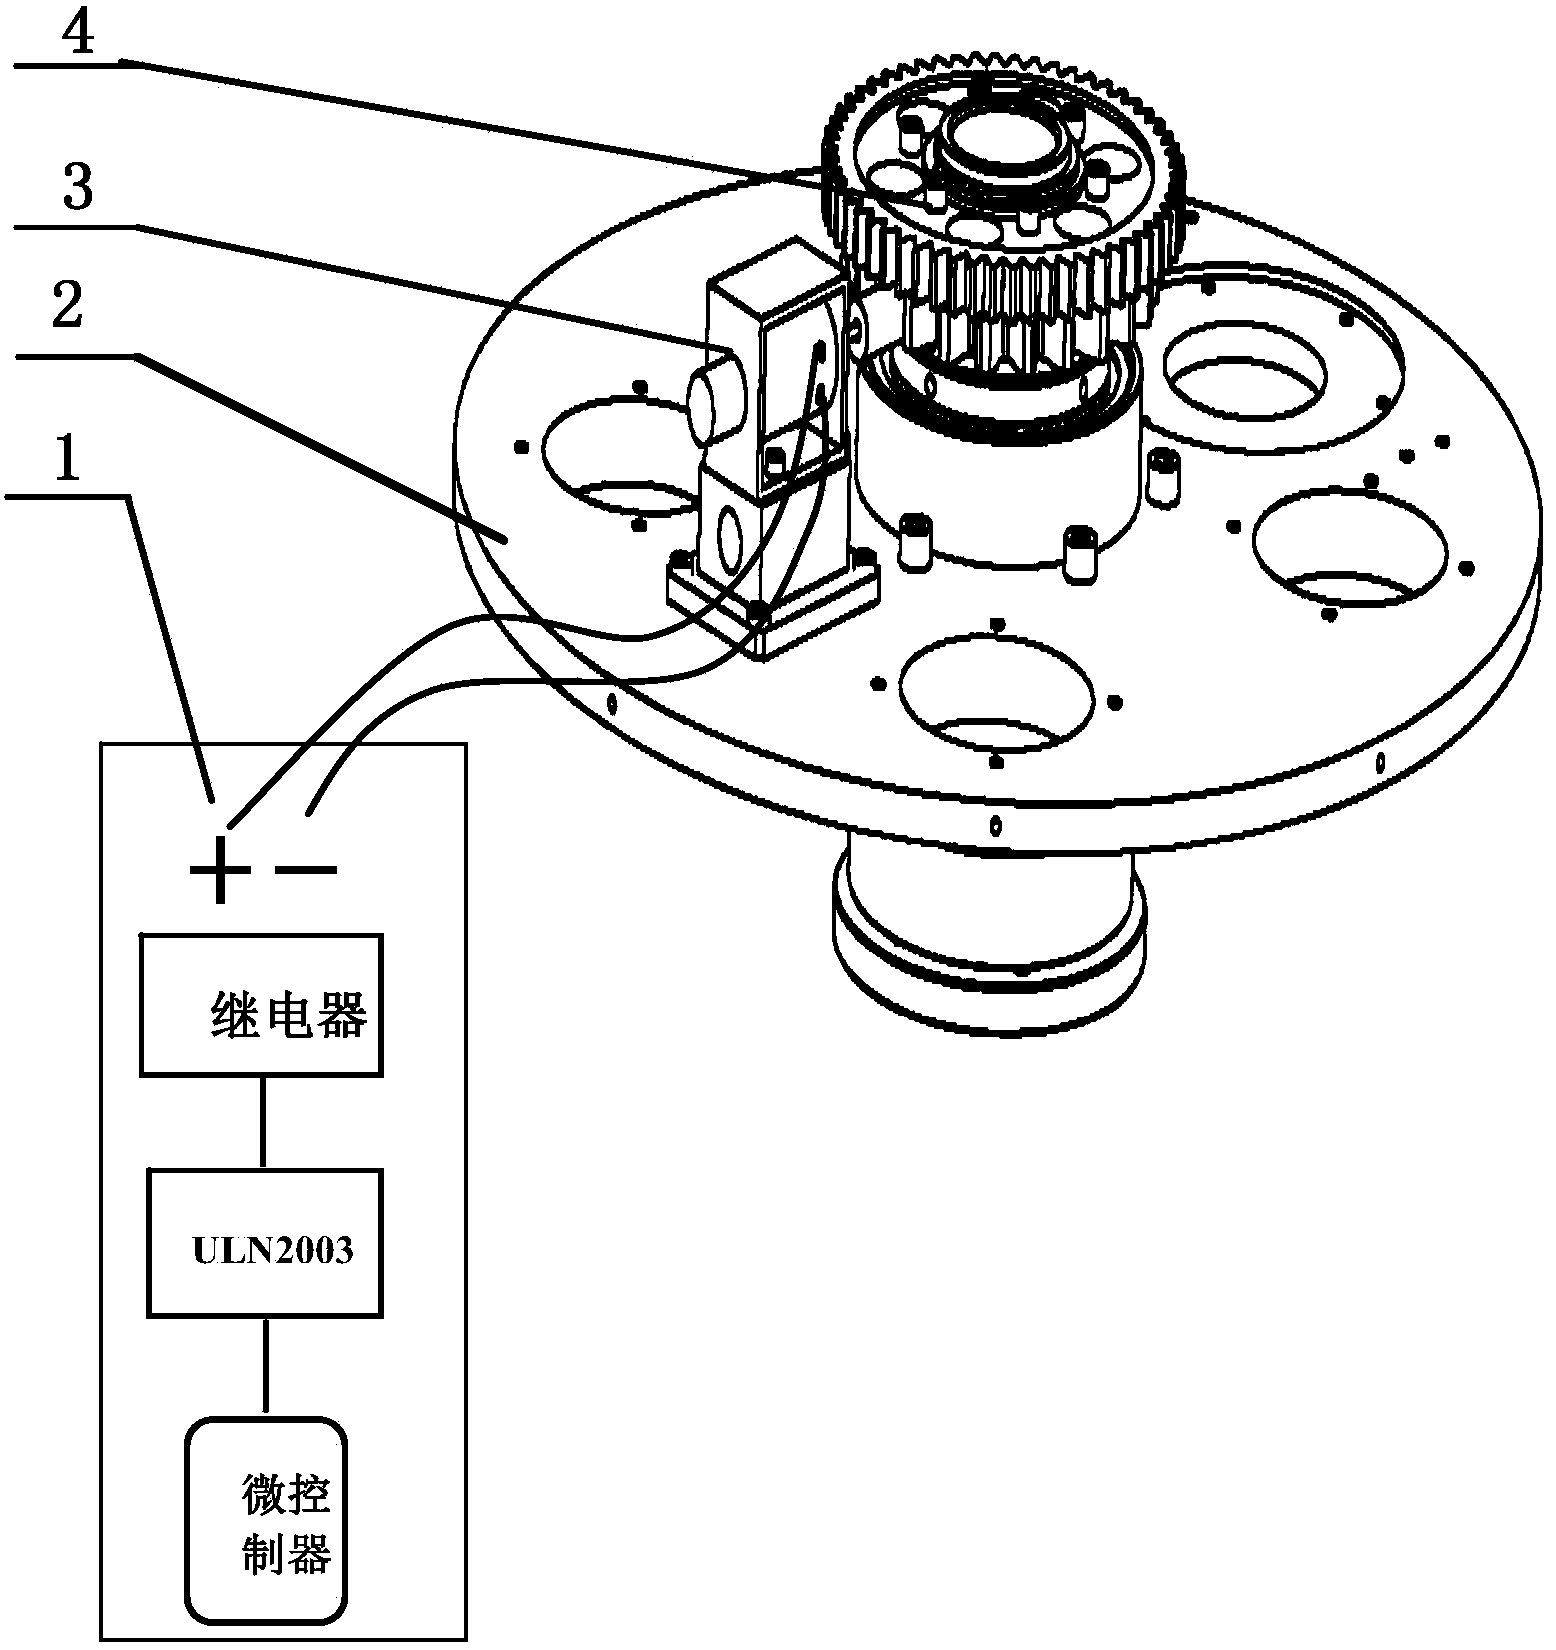 Electromagnetic bolt-gear pair type shafting locking mechanism capable of being controlled through programming